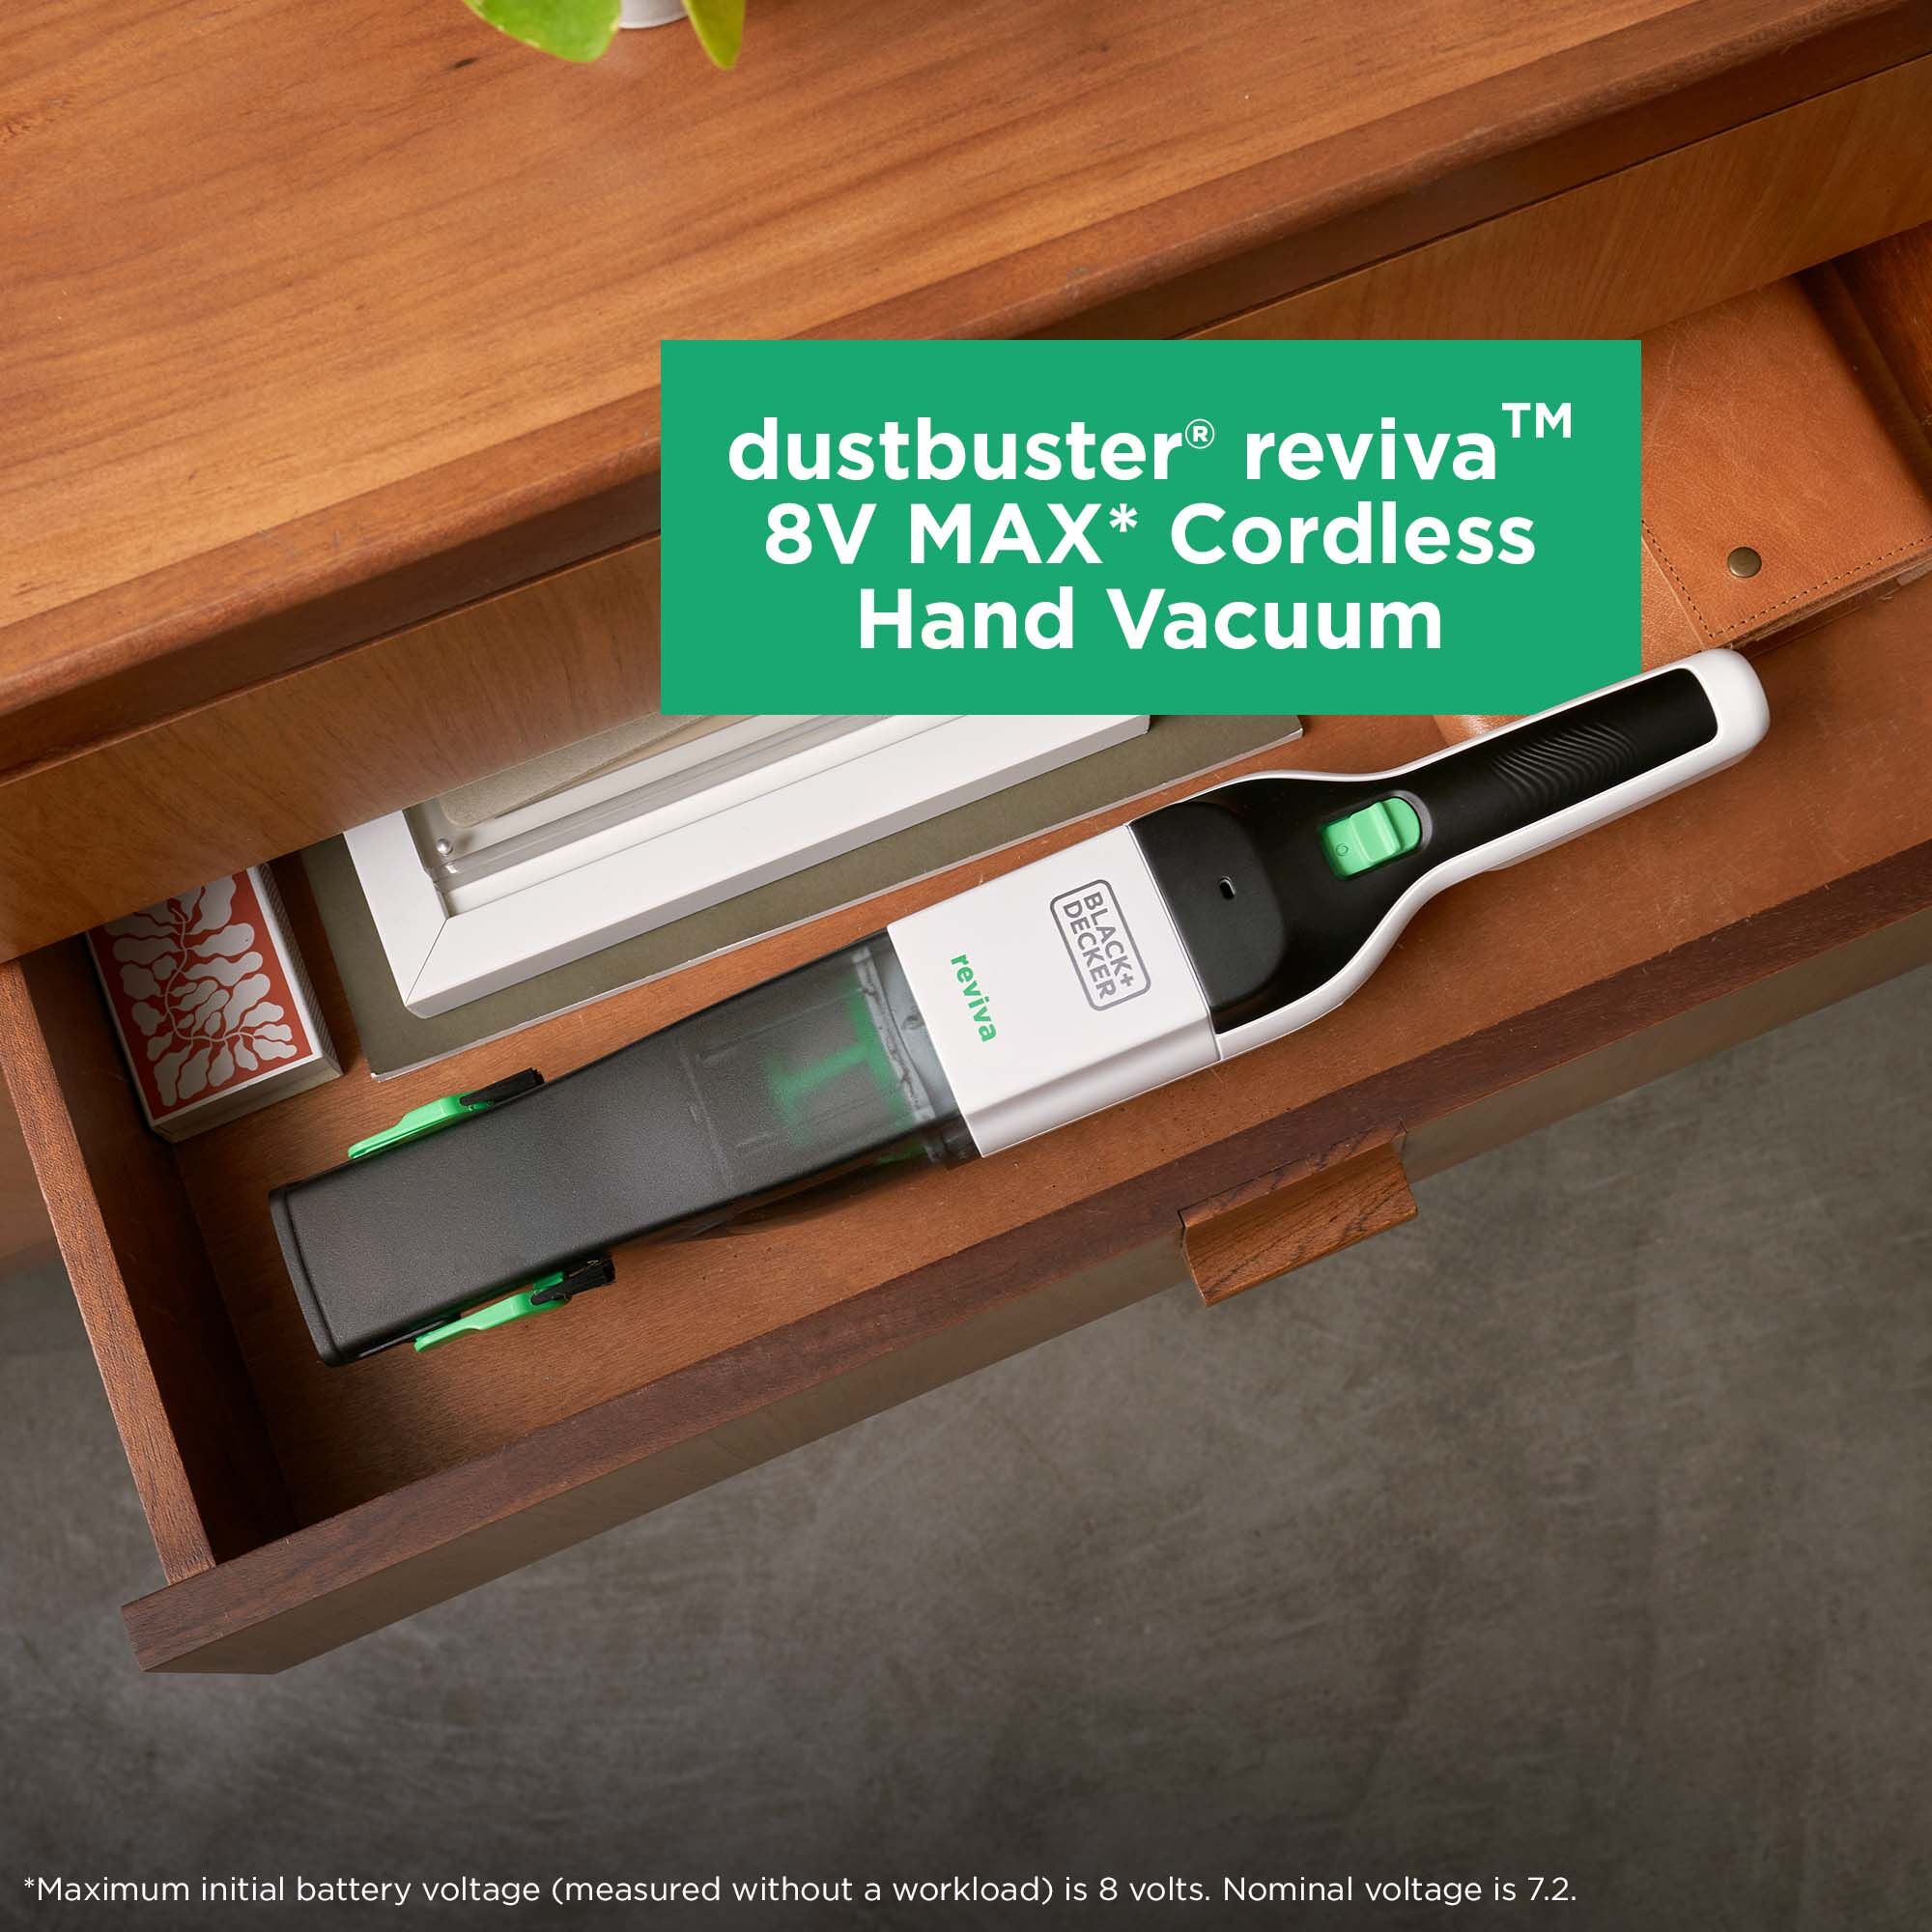 BLACK+DECKER reviva hand vac store in a drawer